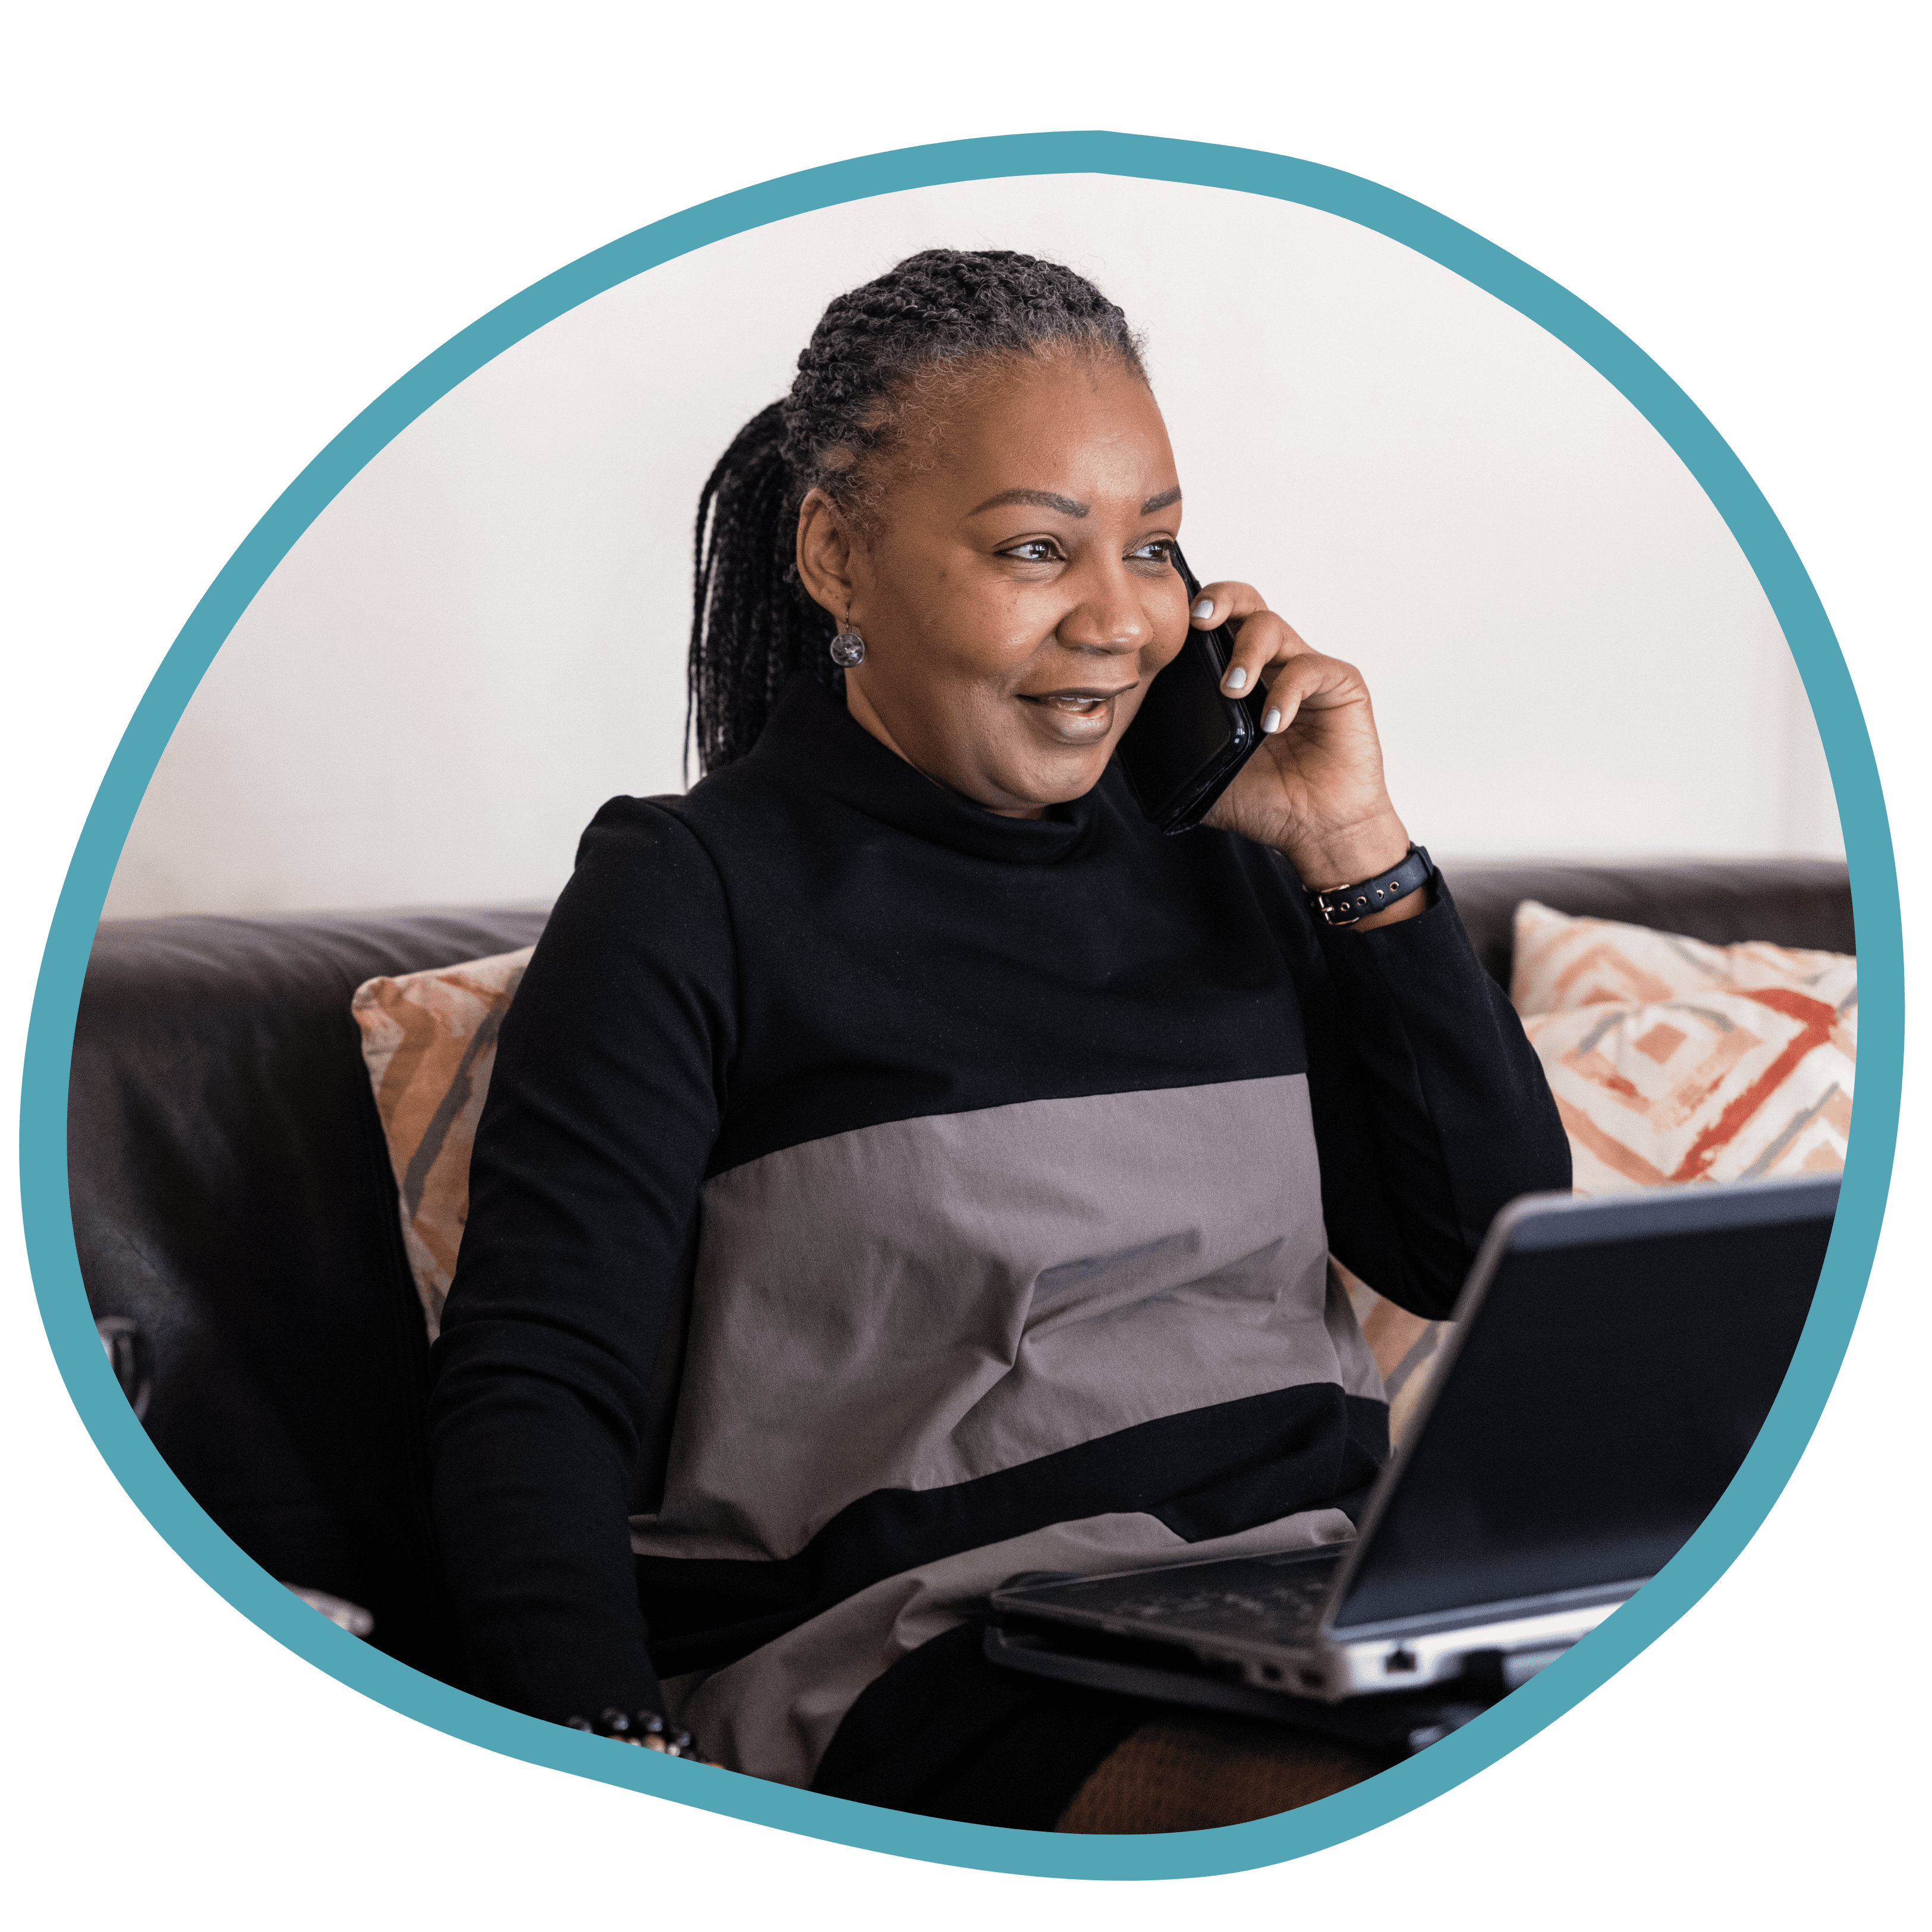 Female carer working on the phone and laptop